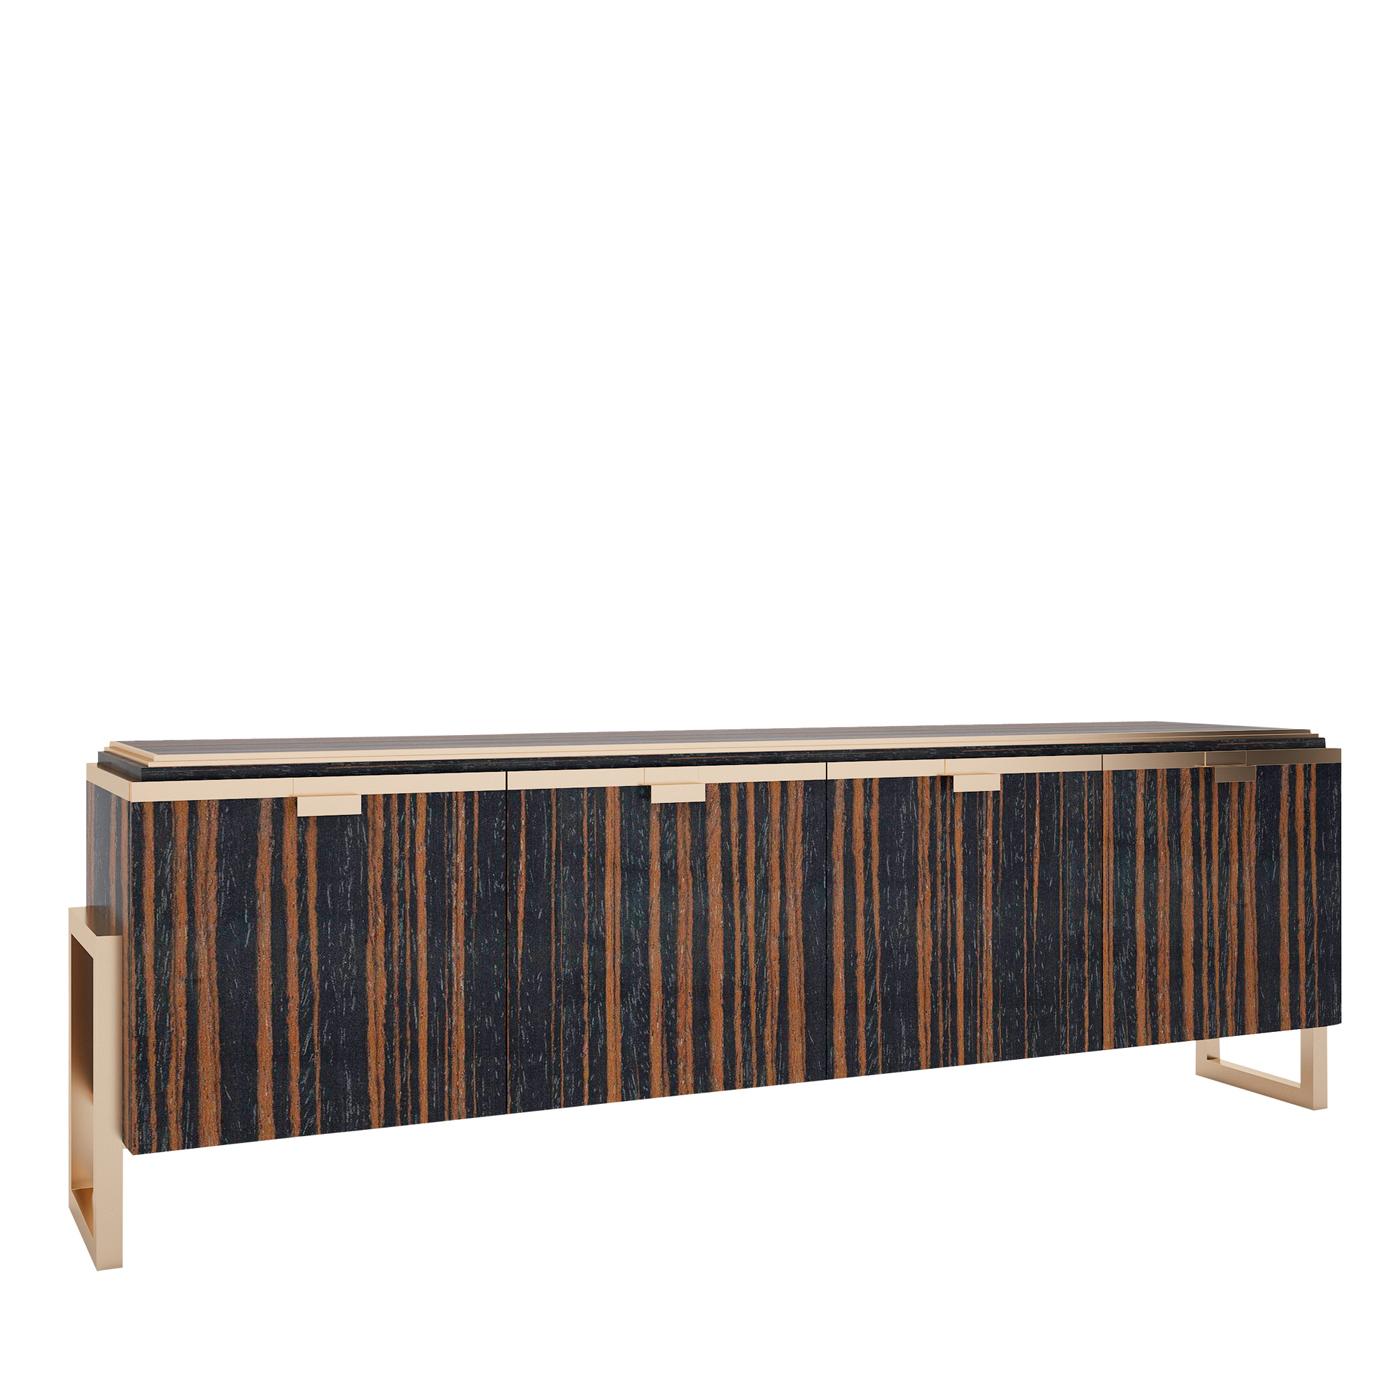 Sustained by two square metal frames with a bright brass finish, this exclusive wooden sideboard boasts four vertically carved doors and a dark brown-lacquered top embellished with a brass-finished metal frame. The same brass finish adorns the front